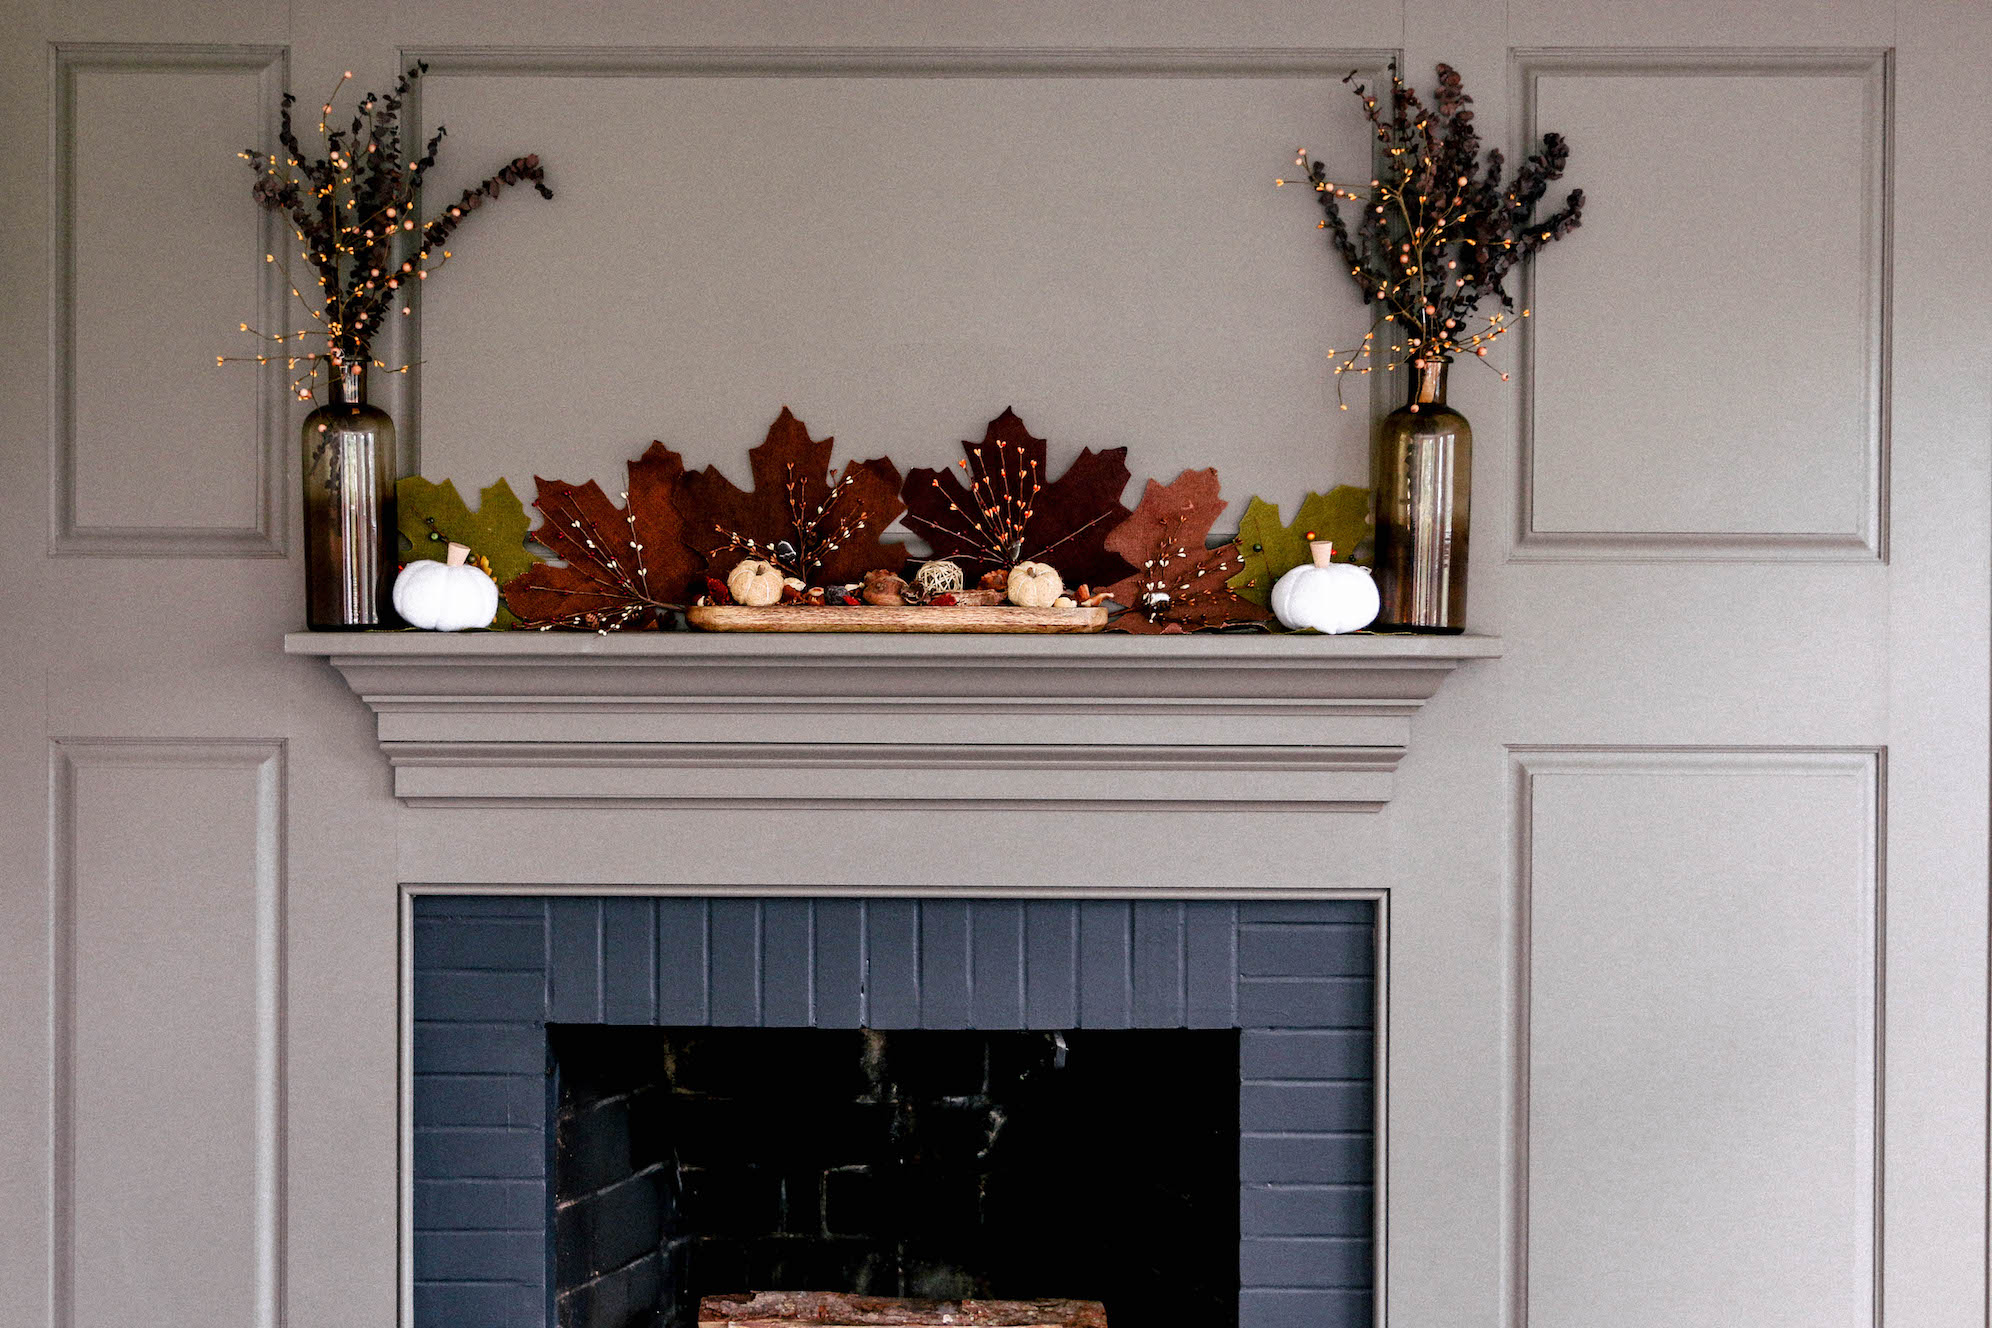 How To Decorate Your Colonial Home For Autumn The Coastal Confidence Aubrey Yandow